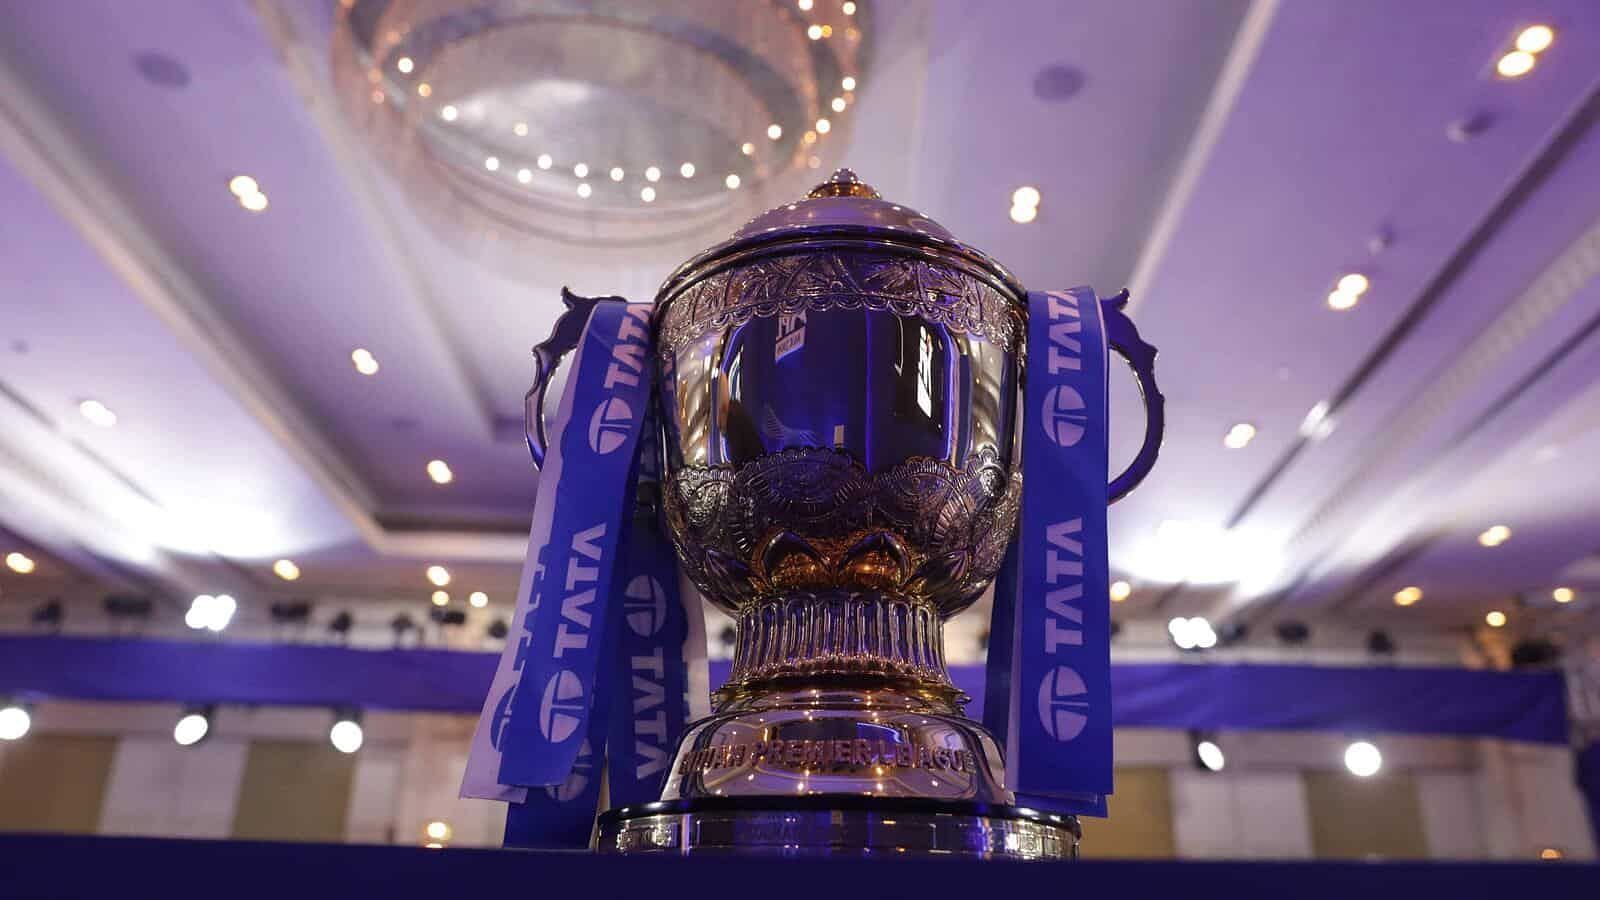 IPL 2022 will be a 10-team competition with the addition of two new teams